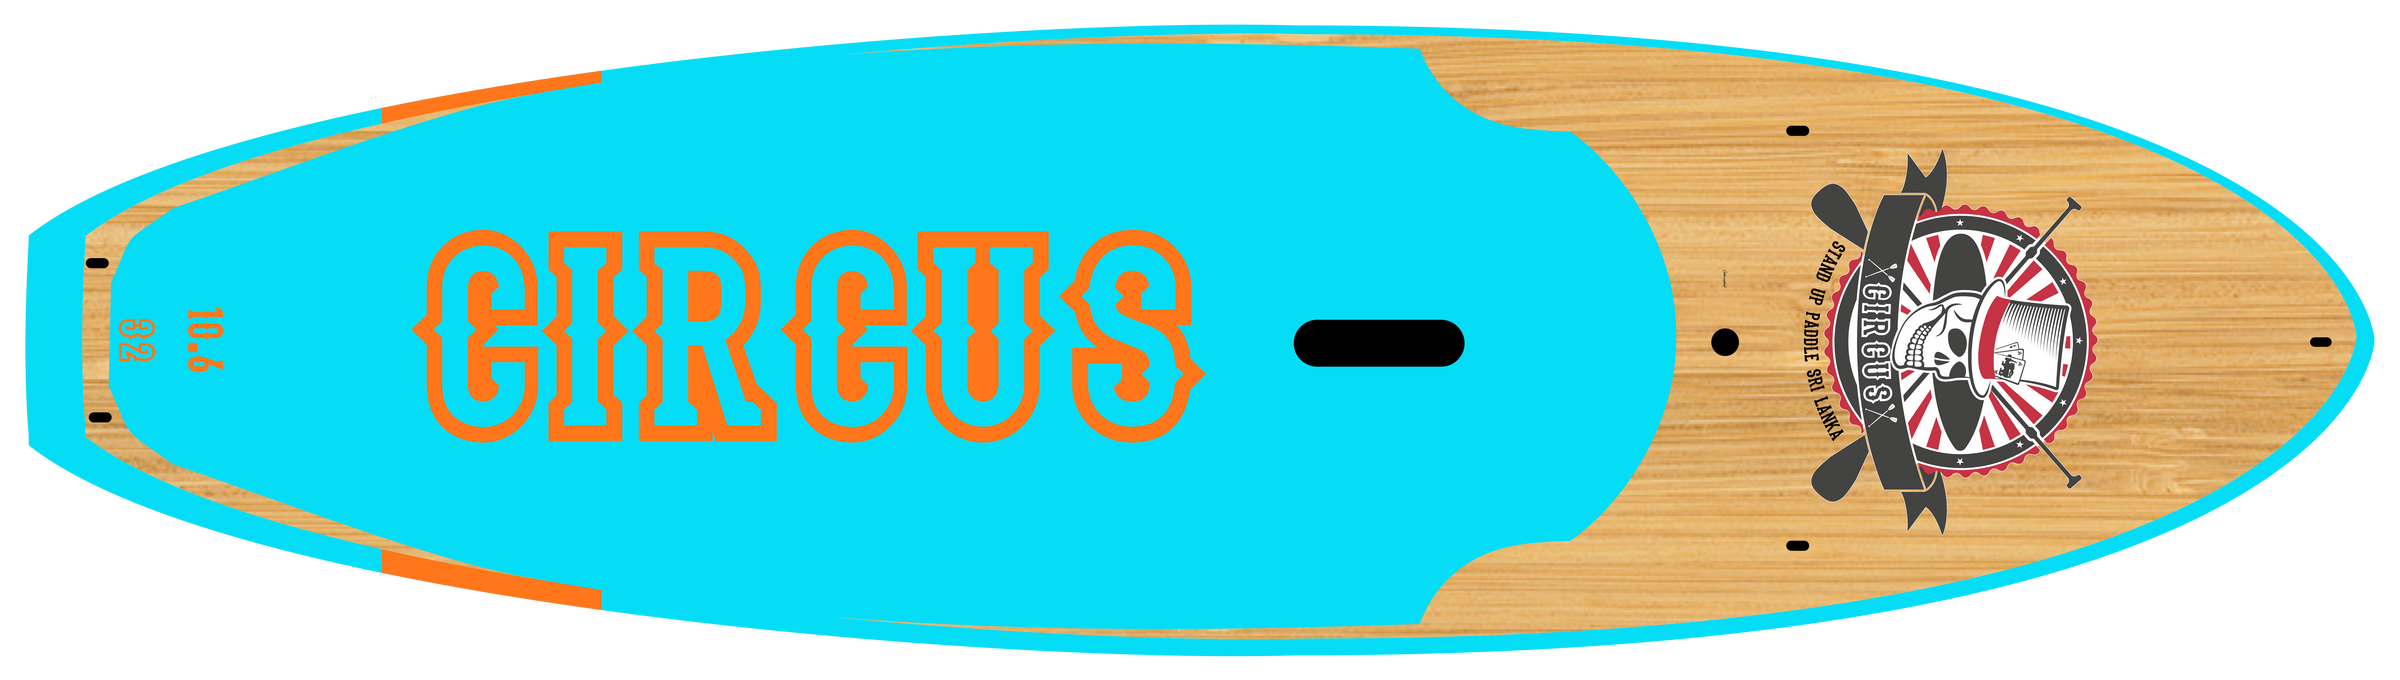 CIRCUS SUP Boards